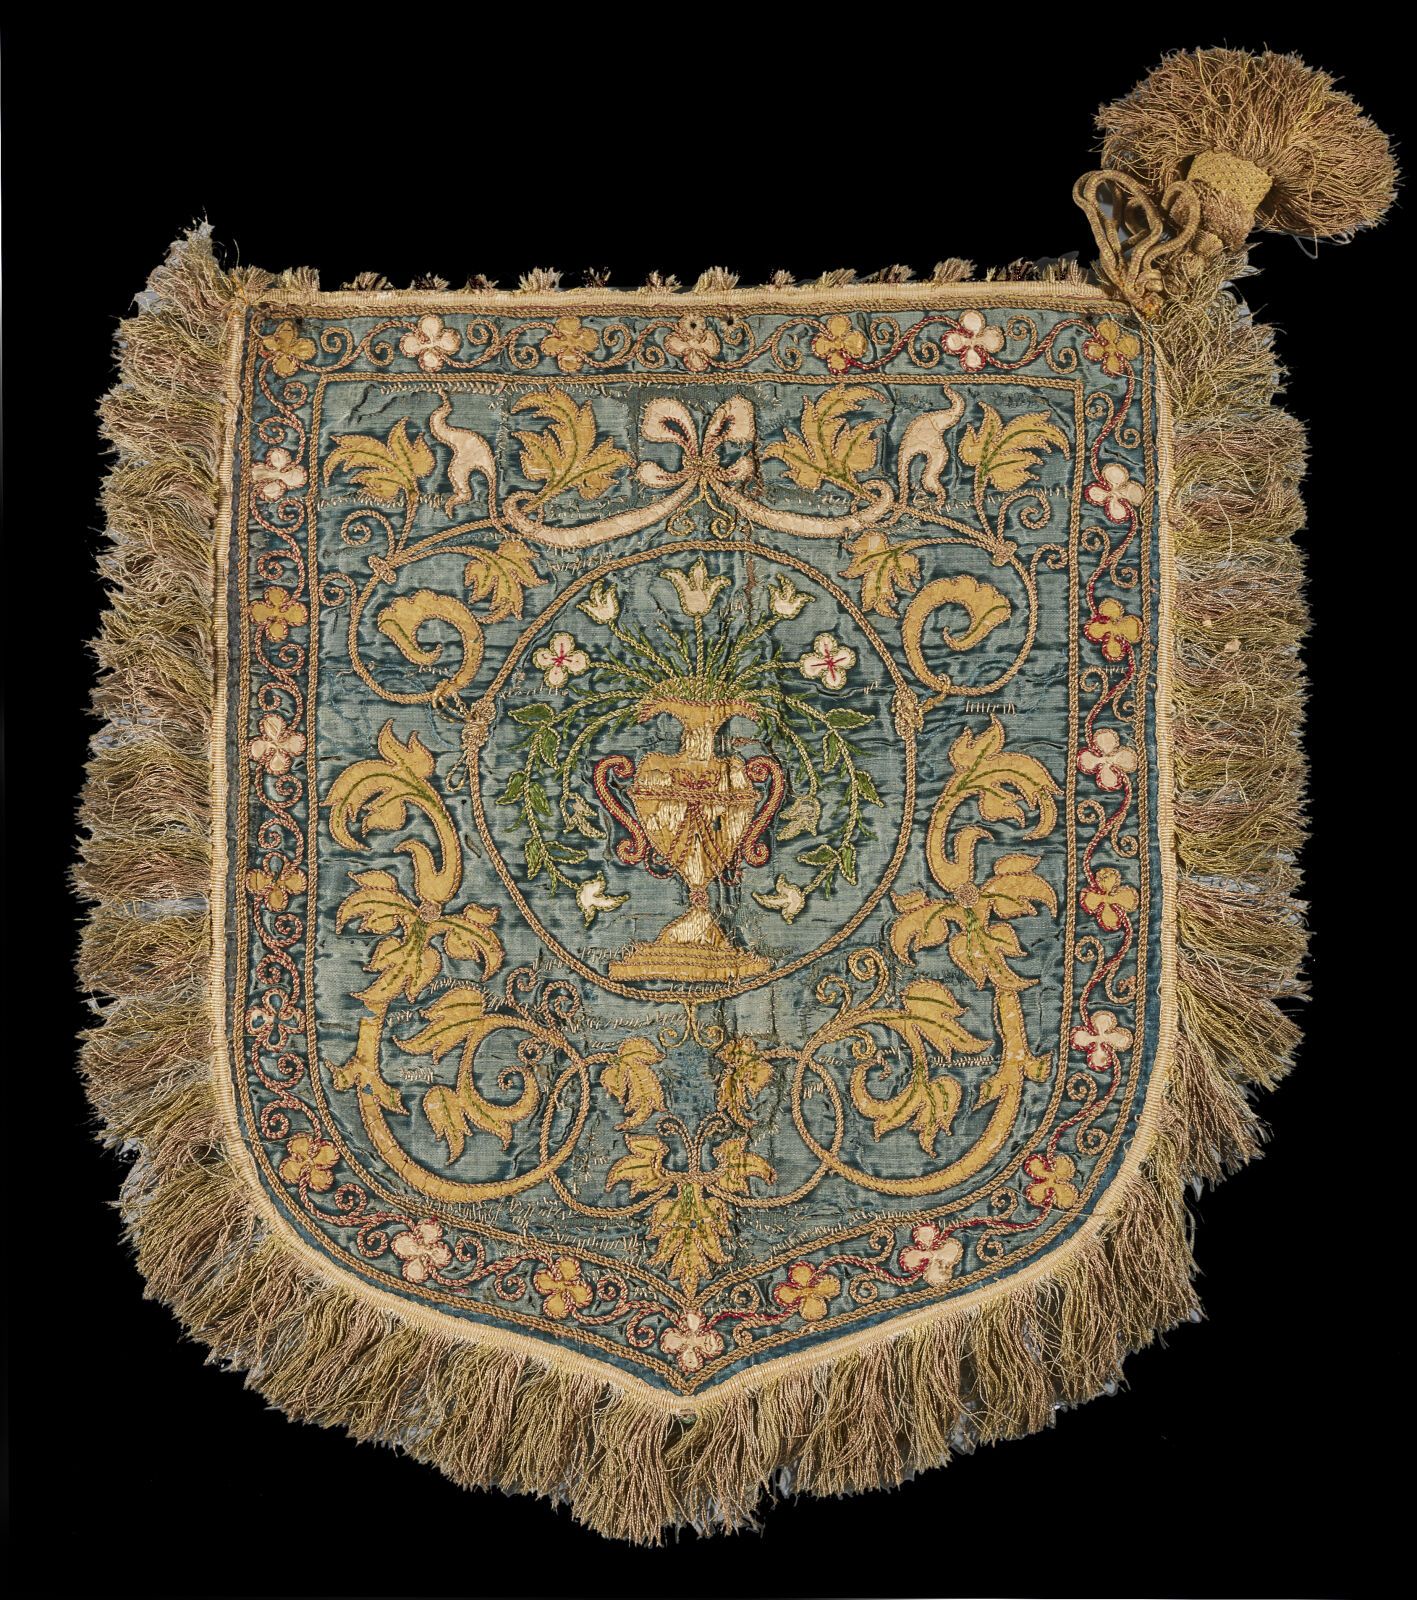 Null Chaperon, Spain, 16th century
Blue velvet embroidered in appliqué and polyc&hellip;